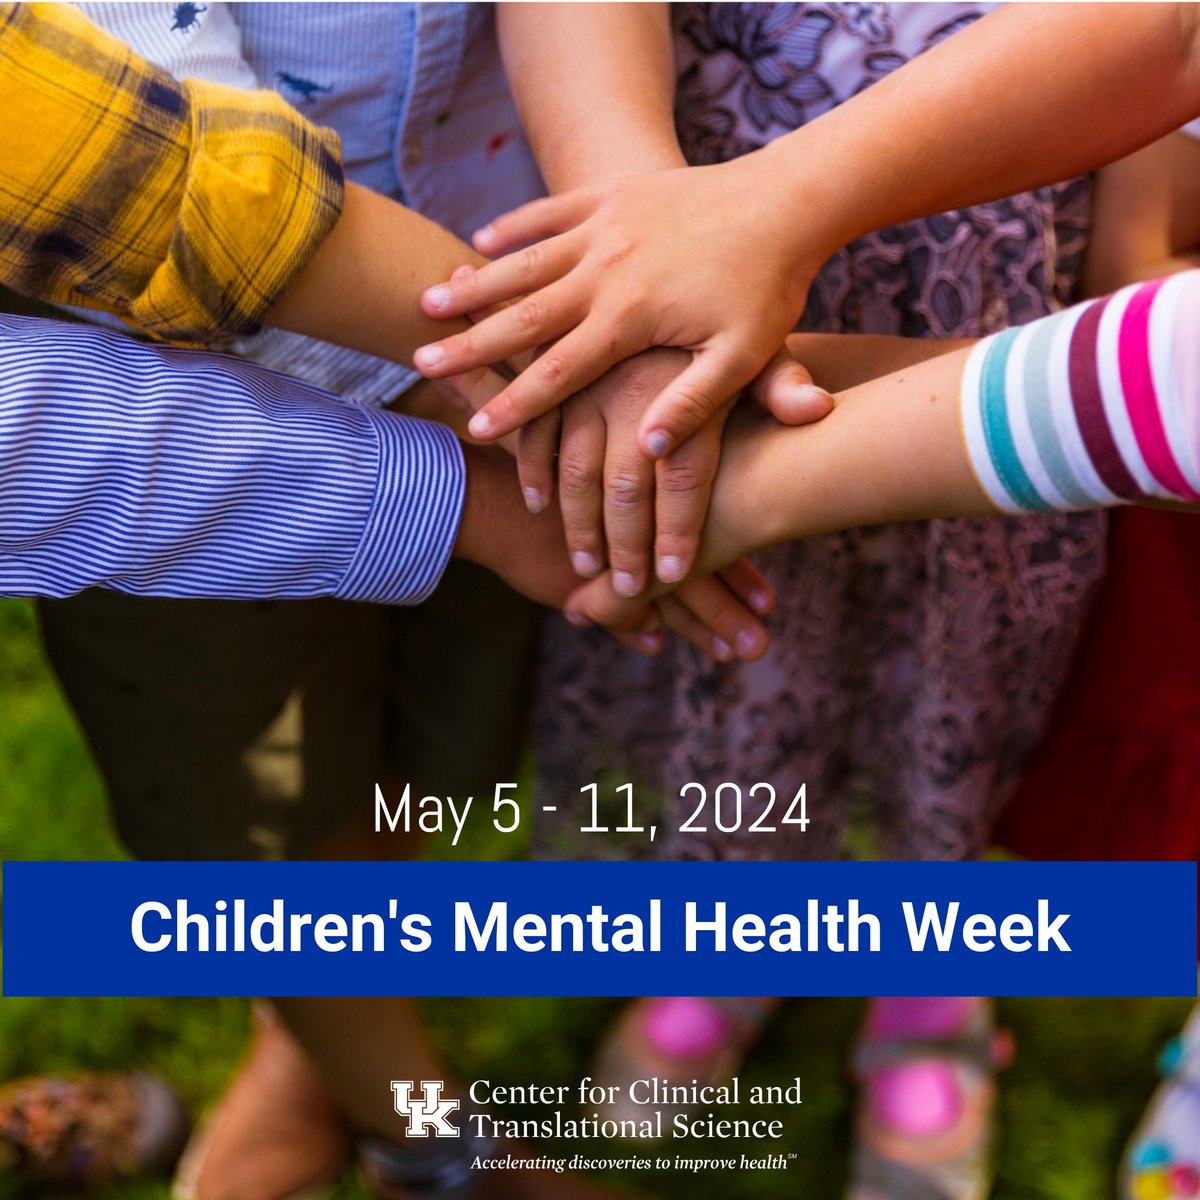 May 5th through May 11th is Children’s Mental Health Awareness Week. Researchers at UK’s Center for Clinical and Translational Science invite you to participate in studies related to Children’s Mental health. Children's Health Care studies: ccts.uky.edu/participate-re…